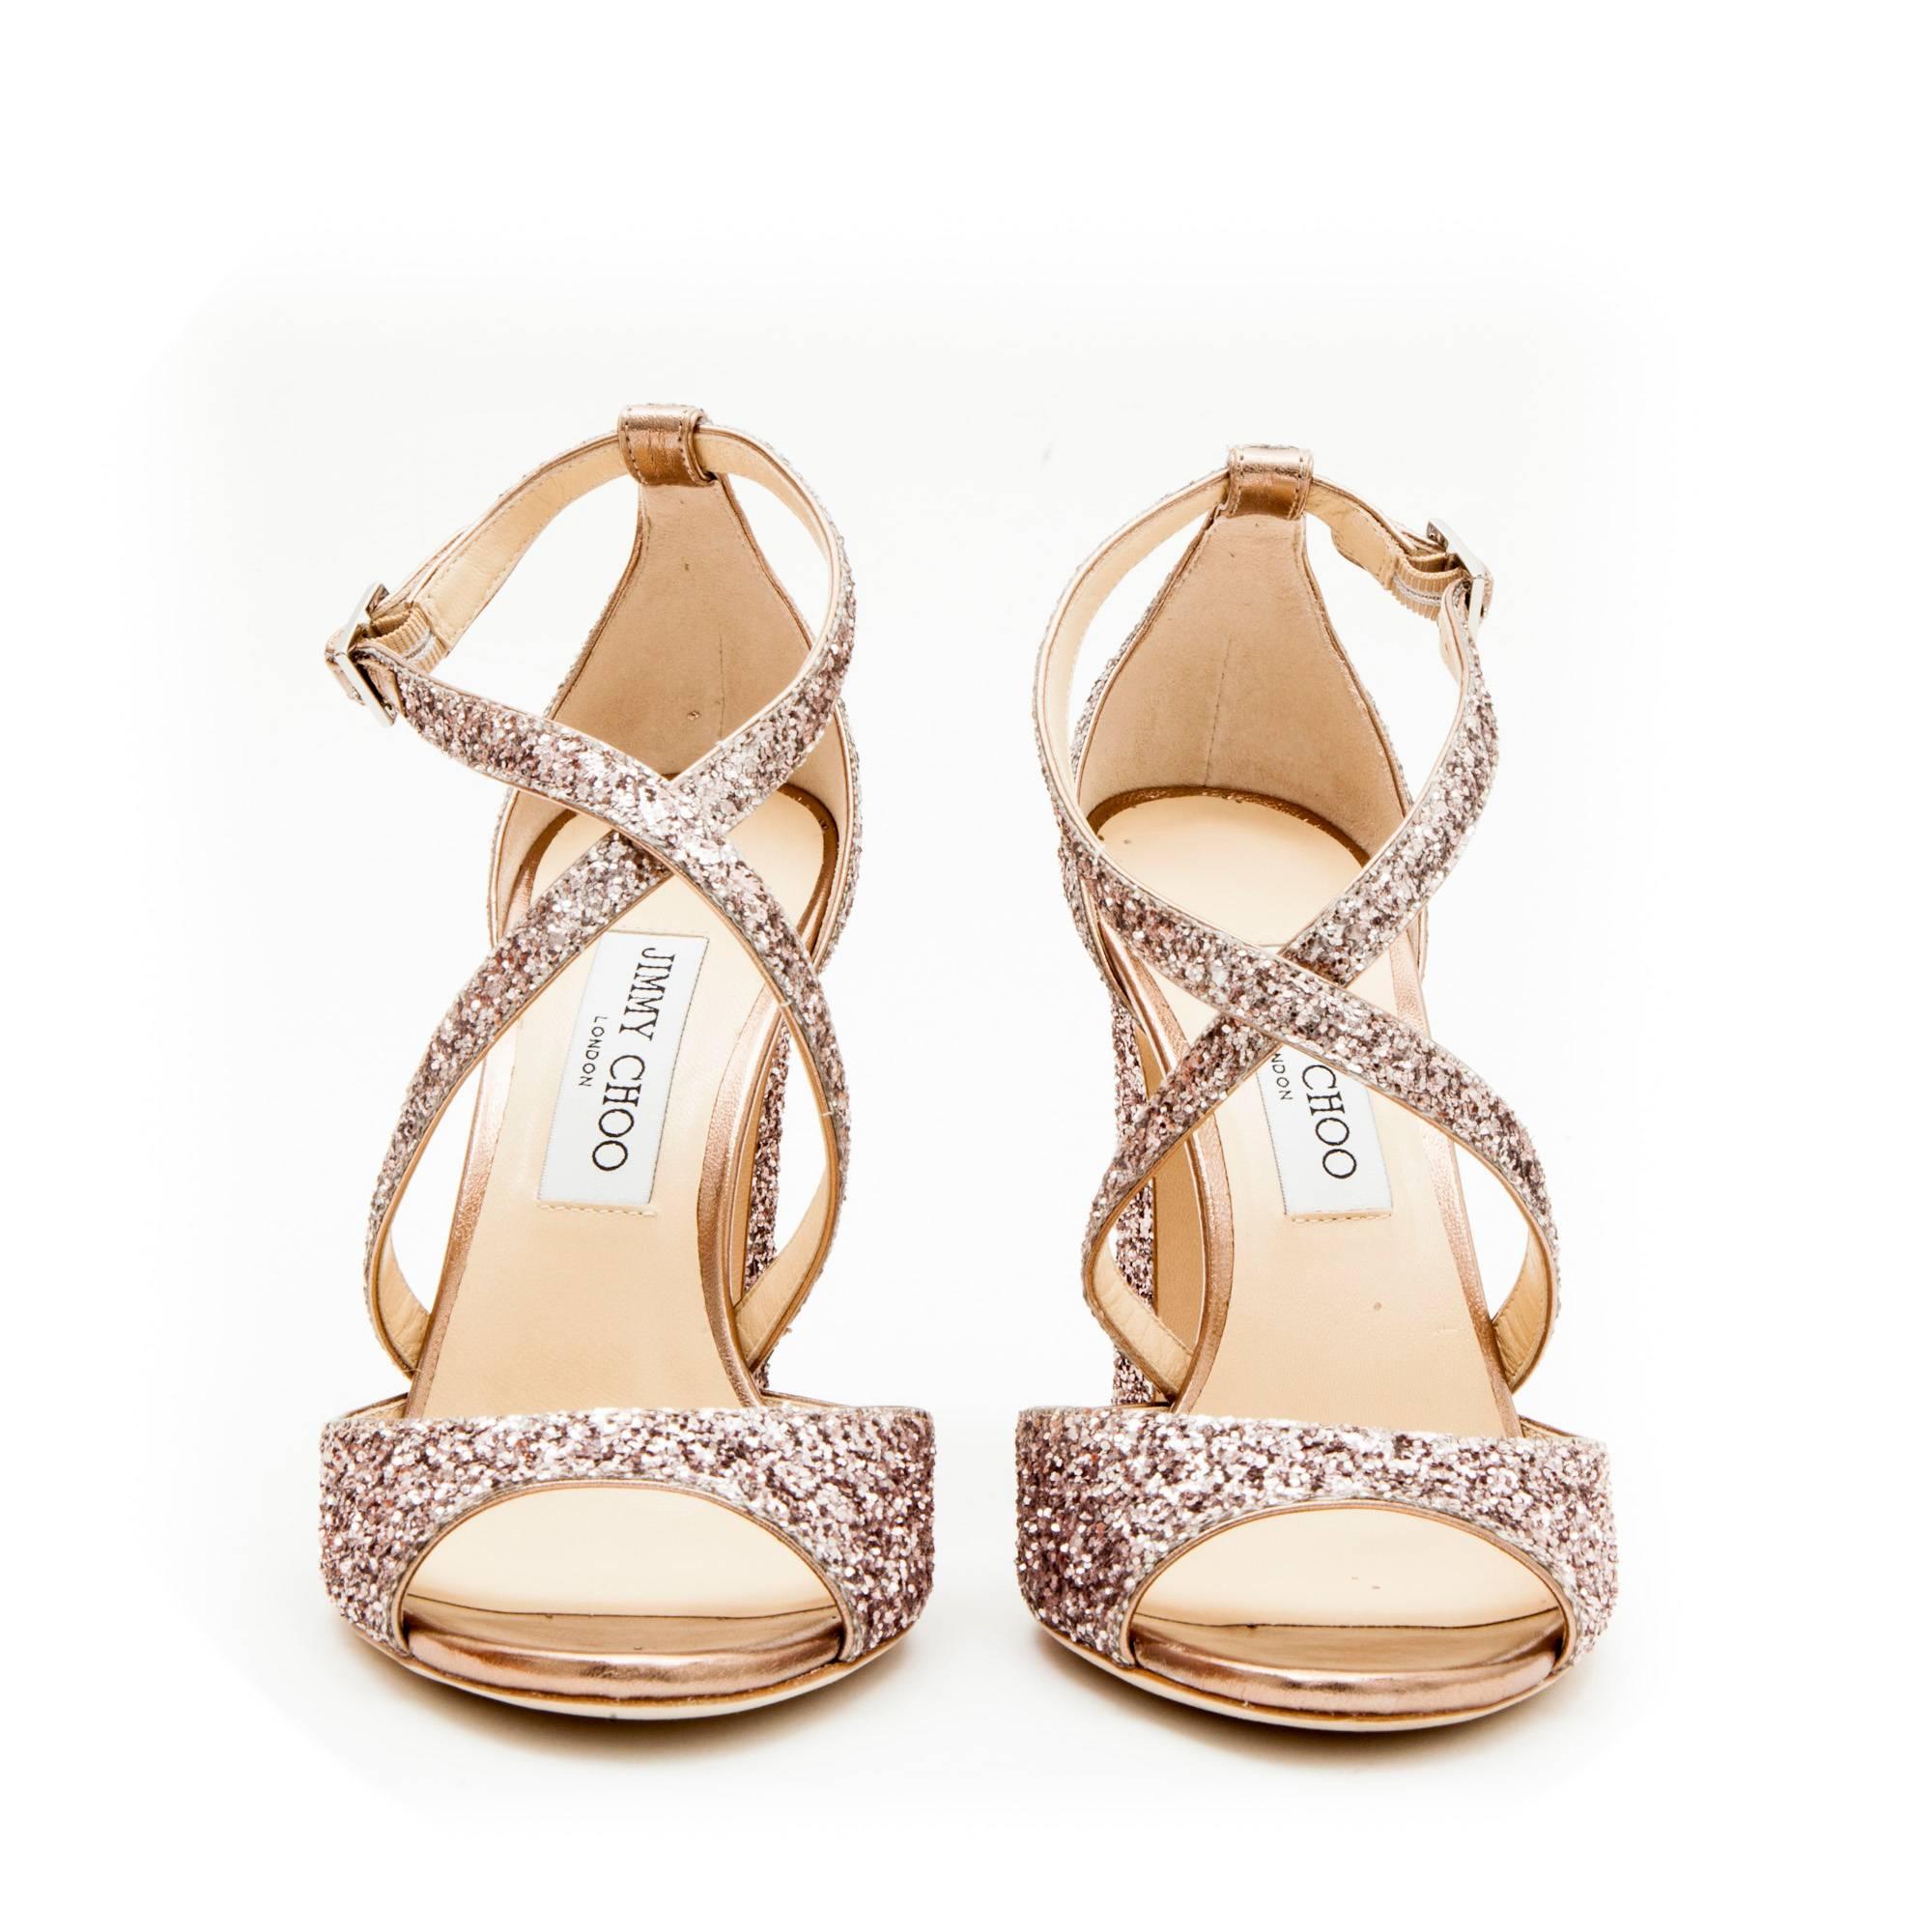 Jimmy Choo pink sequined high heel sandals.

Dimensions:  length of the insole: 26 cm.

 Made in Italy.

Will be delivered in a Jimmy Choo dustbag 